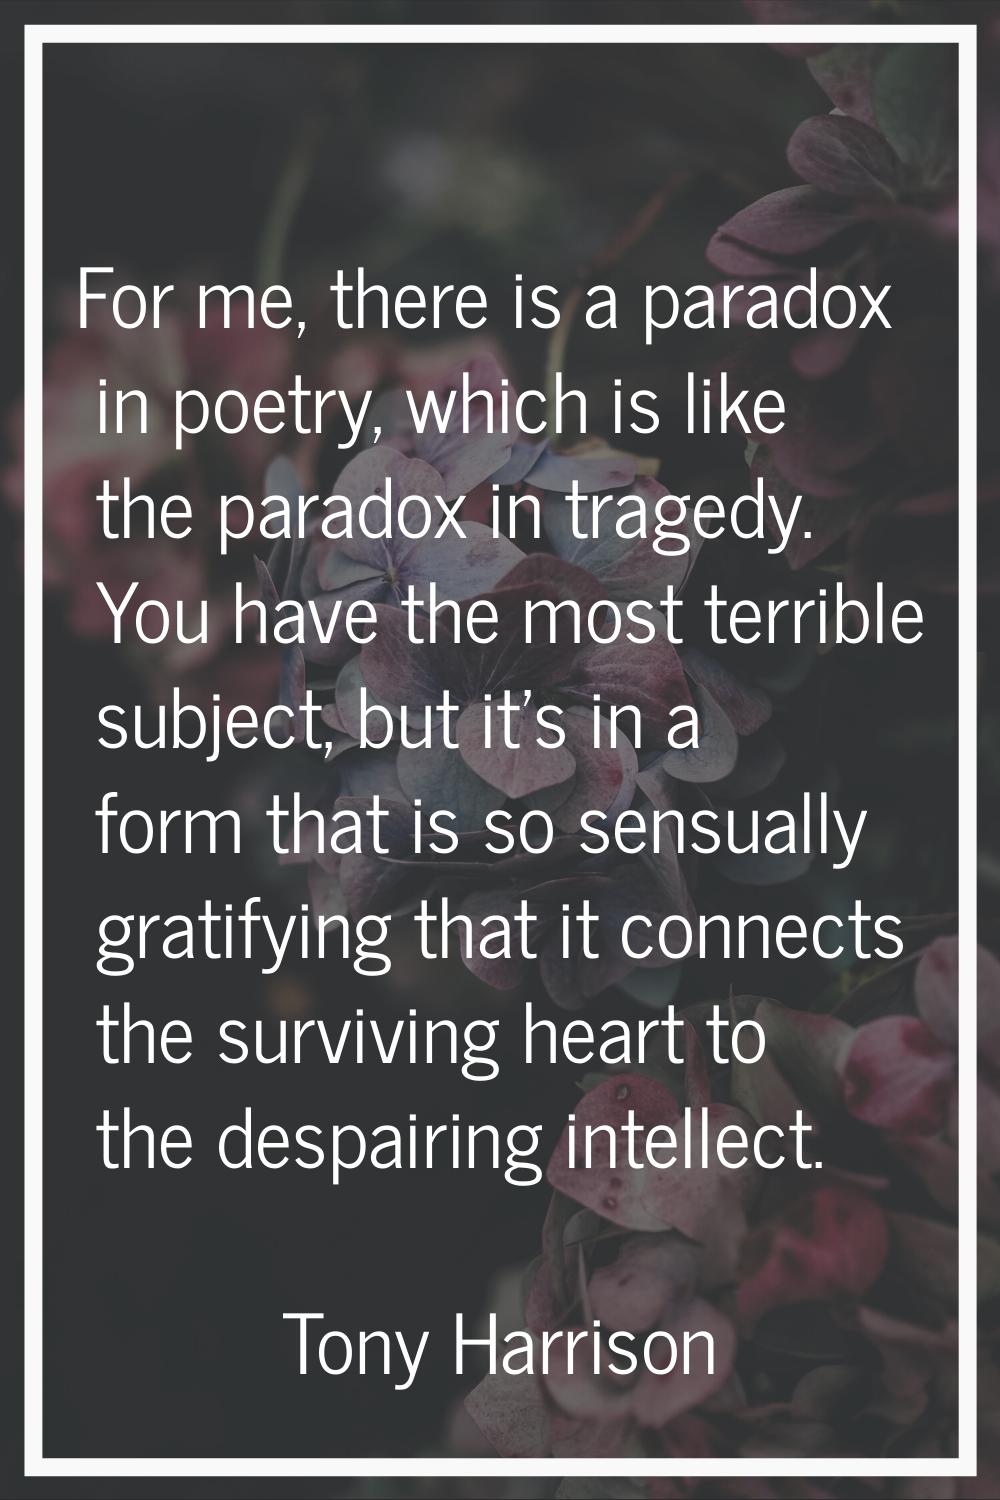 For me, there is a paradox in poetry, which is like the paradox in tragedy. You have the most terri